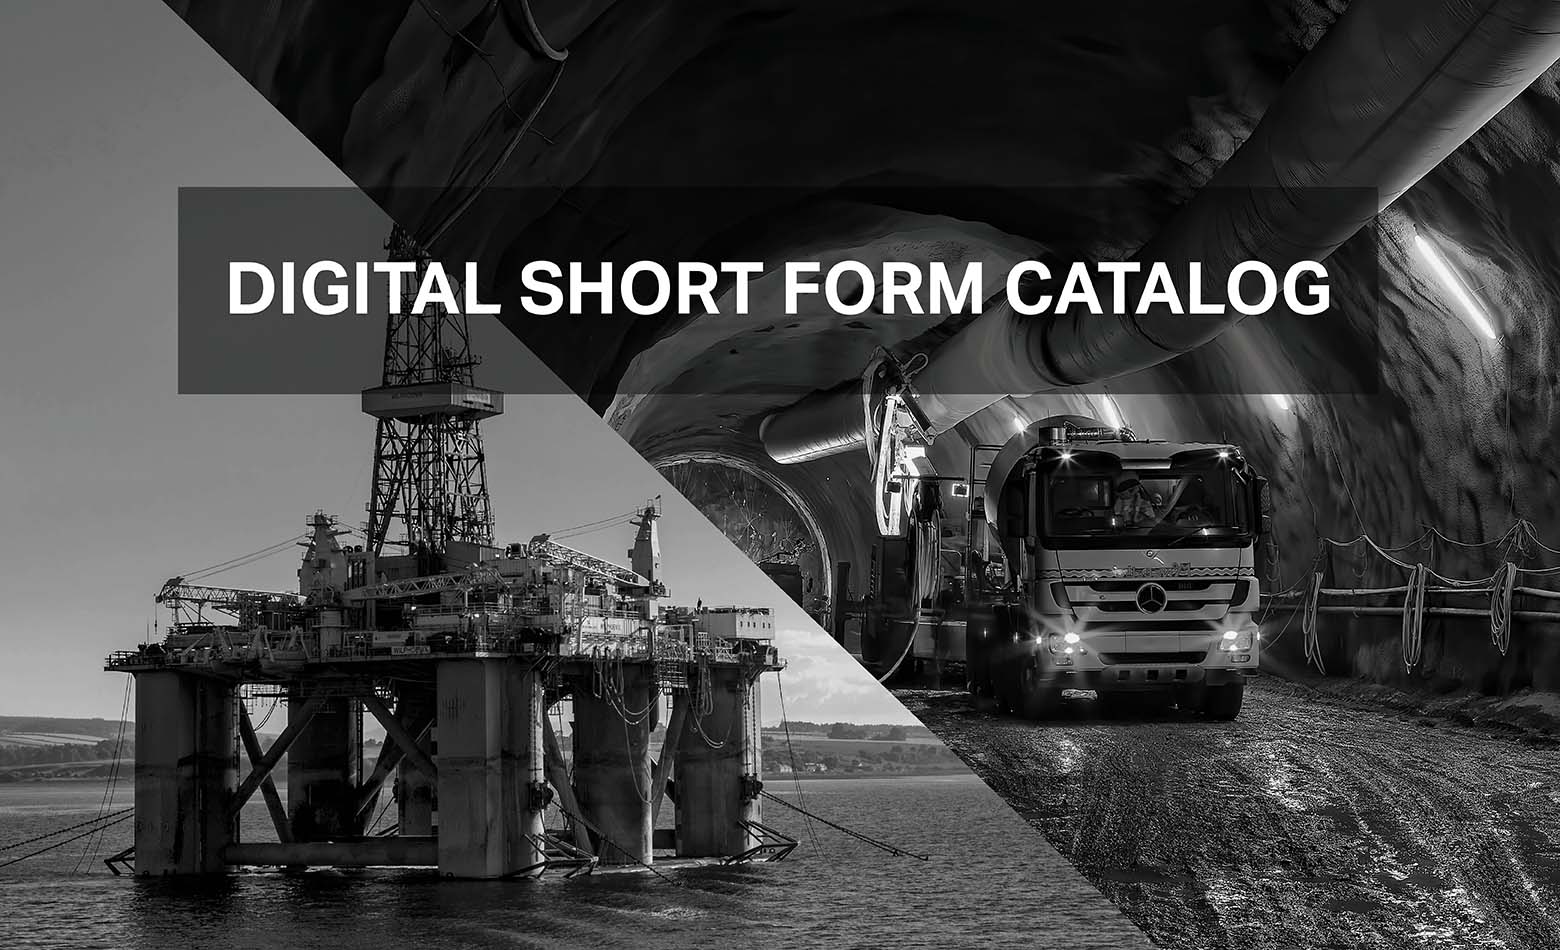 CTC Digital Short Form Catalog cover with off-shore oil rig and underground mining industries pictured in black and white.